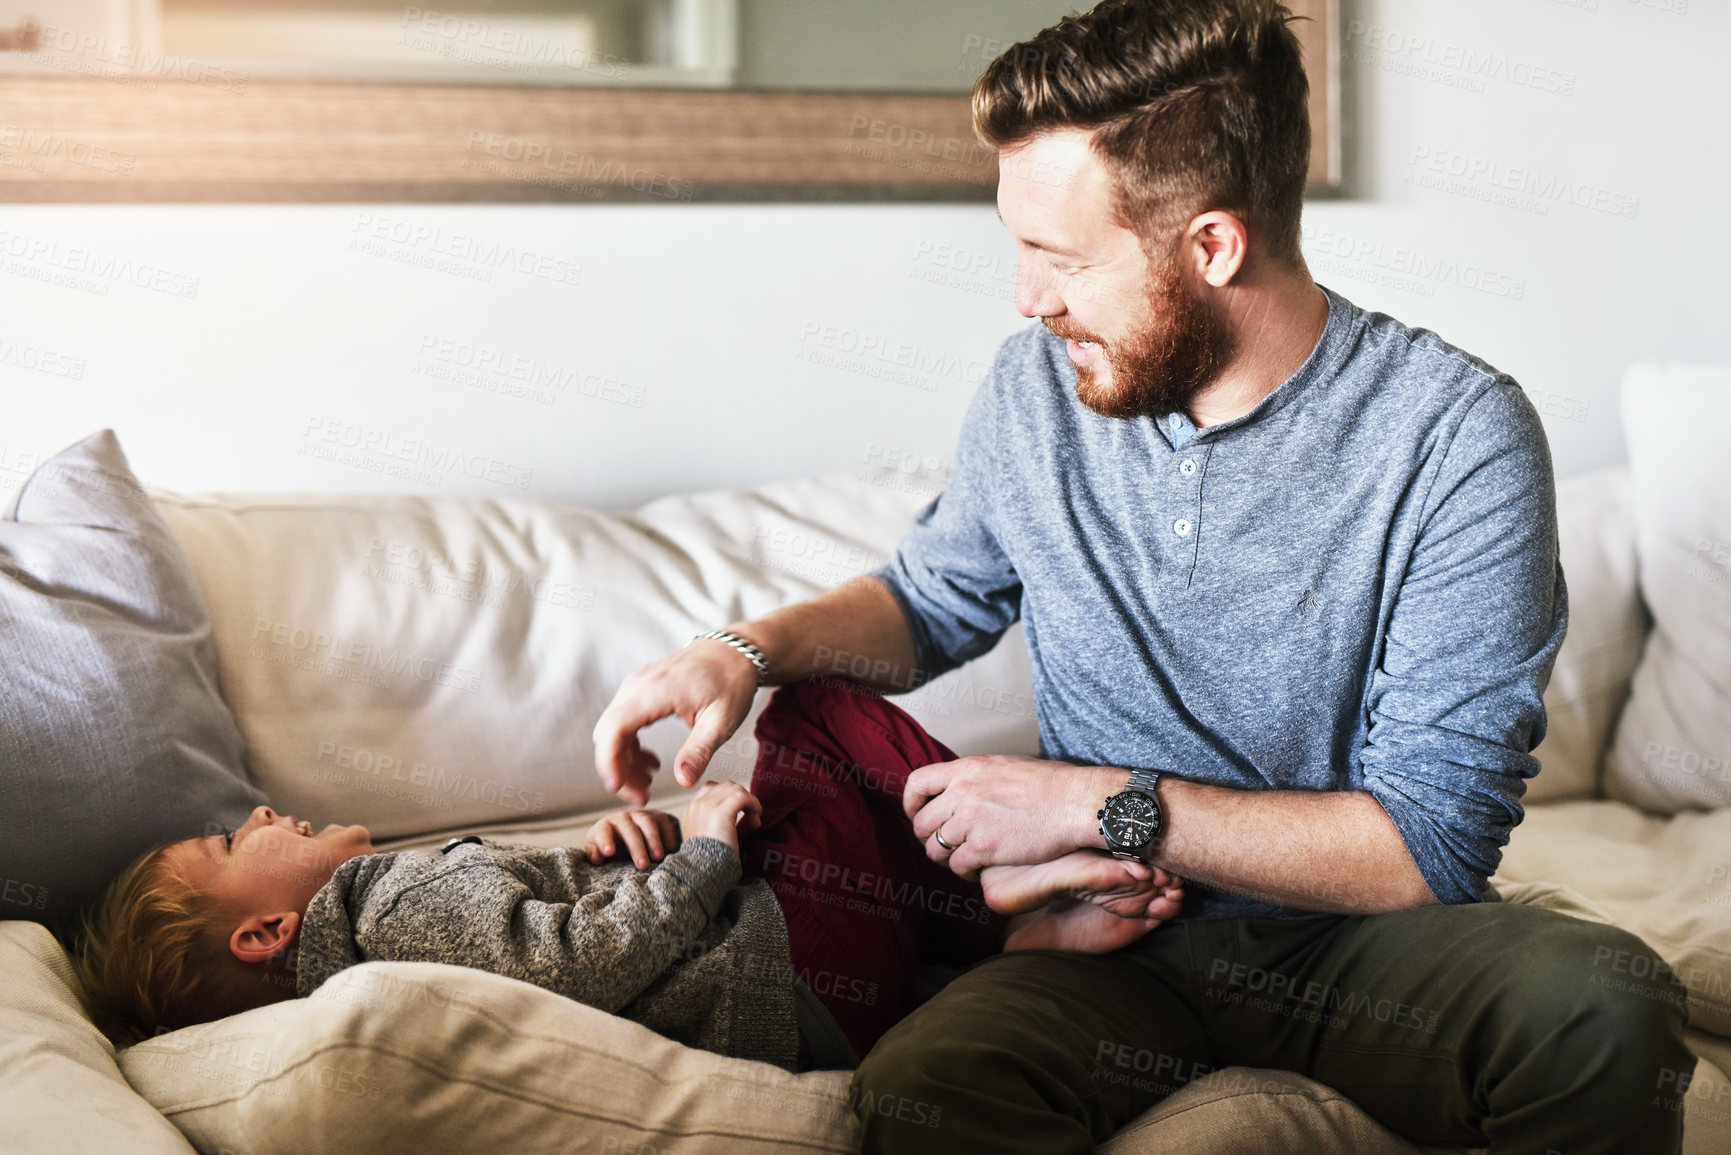 Buy stock photo Shot of a cheerful young man tickling his little boy while they hang out on the sofa at home during the day